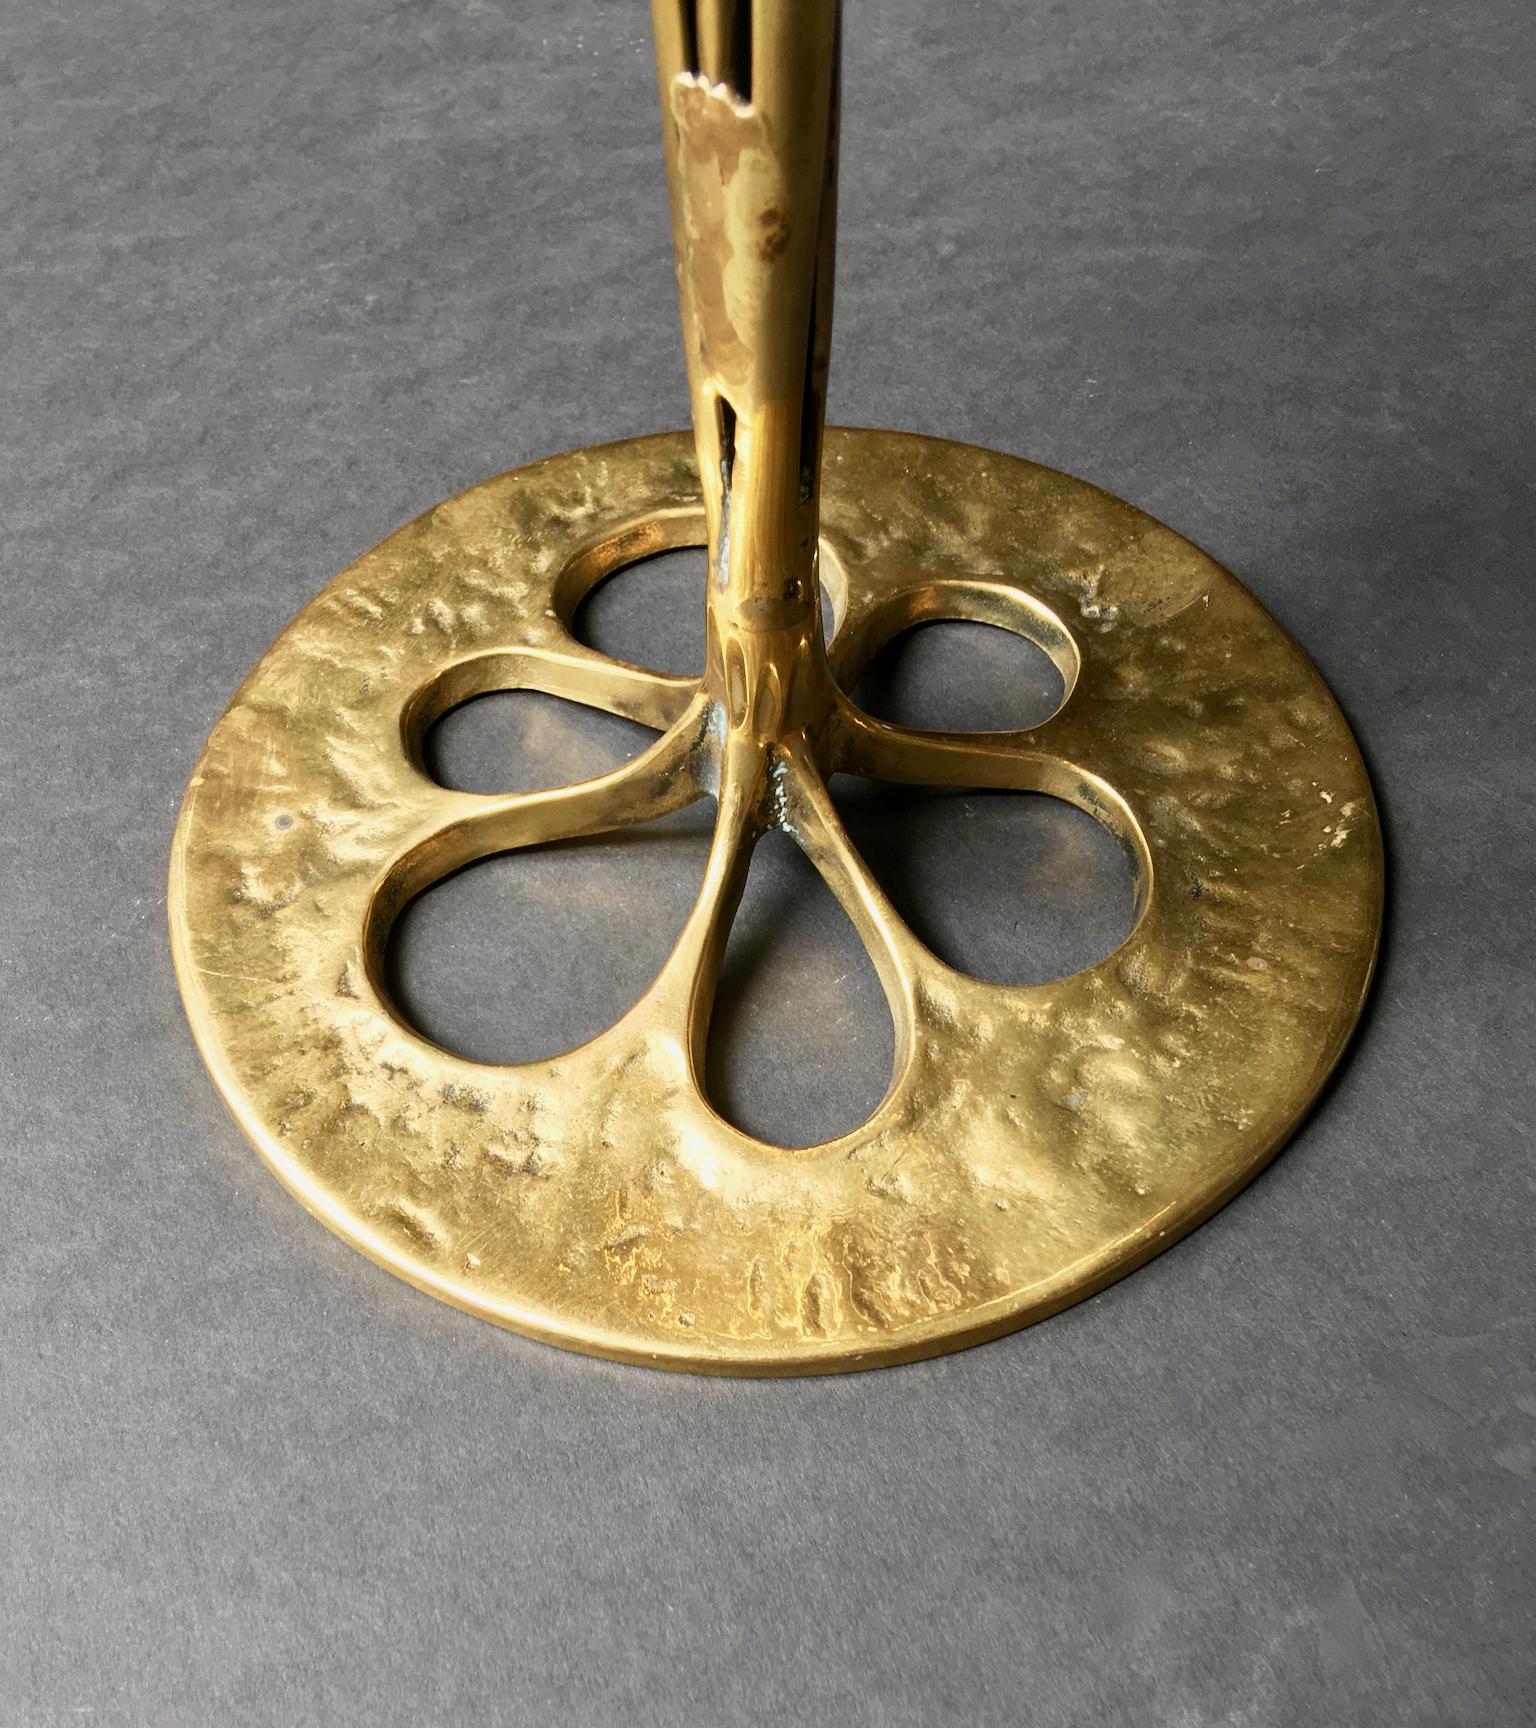 Cast Seven-Arm Brass Candlestick or Candelabra of Organic Form